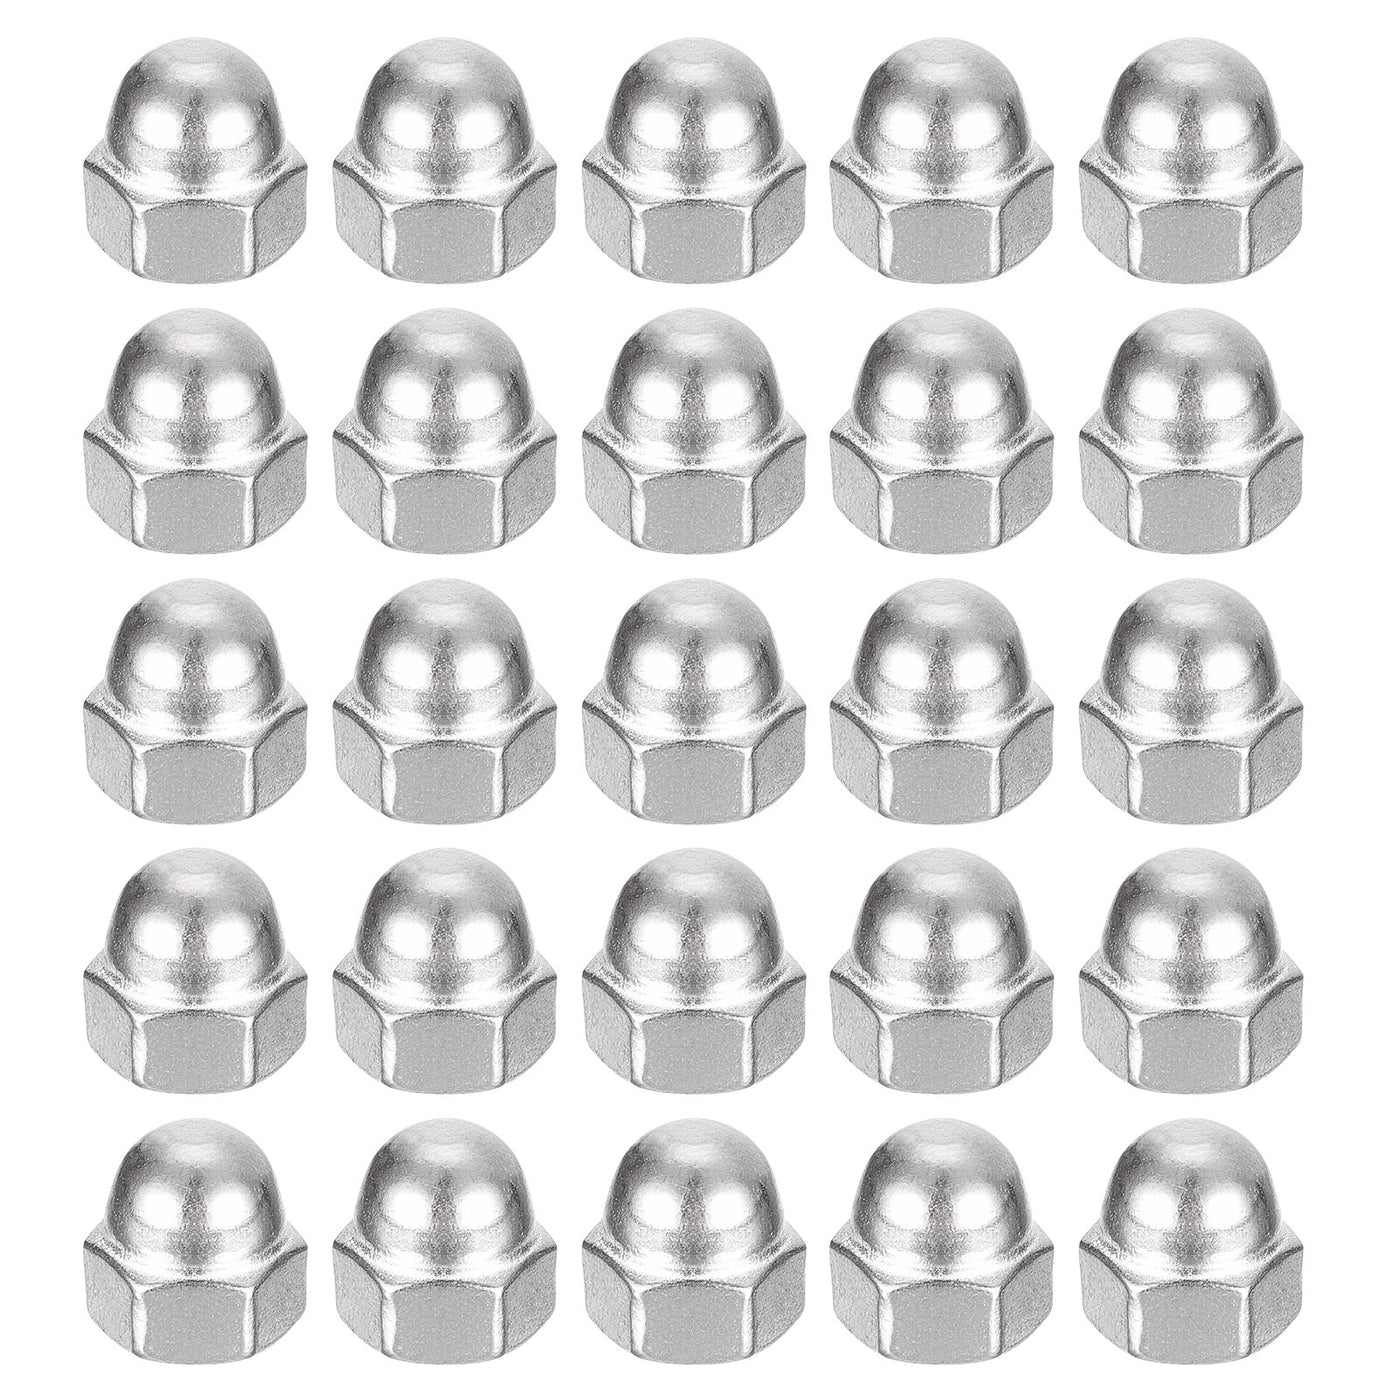 uxcell Uxcell #10-24 Acorn Cap Nuts,25pcs - 304 Stainless Steel Hardware Nuts, Acorn Hex Cap Dome Head Nuts for Fasteners (Silver)